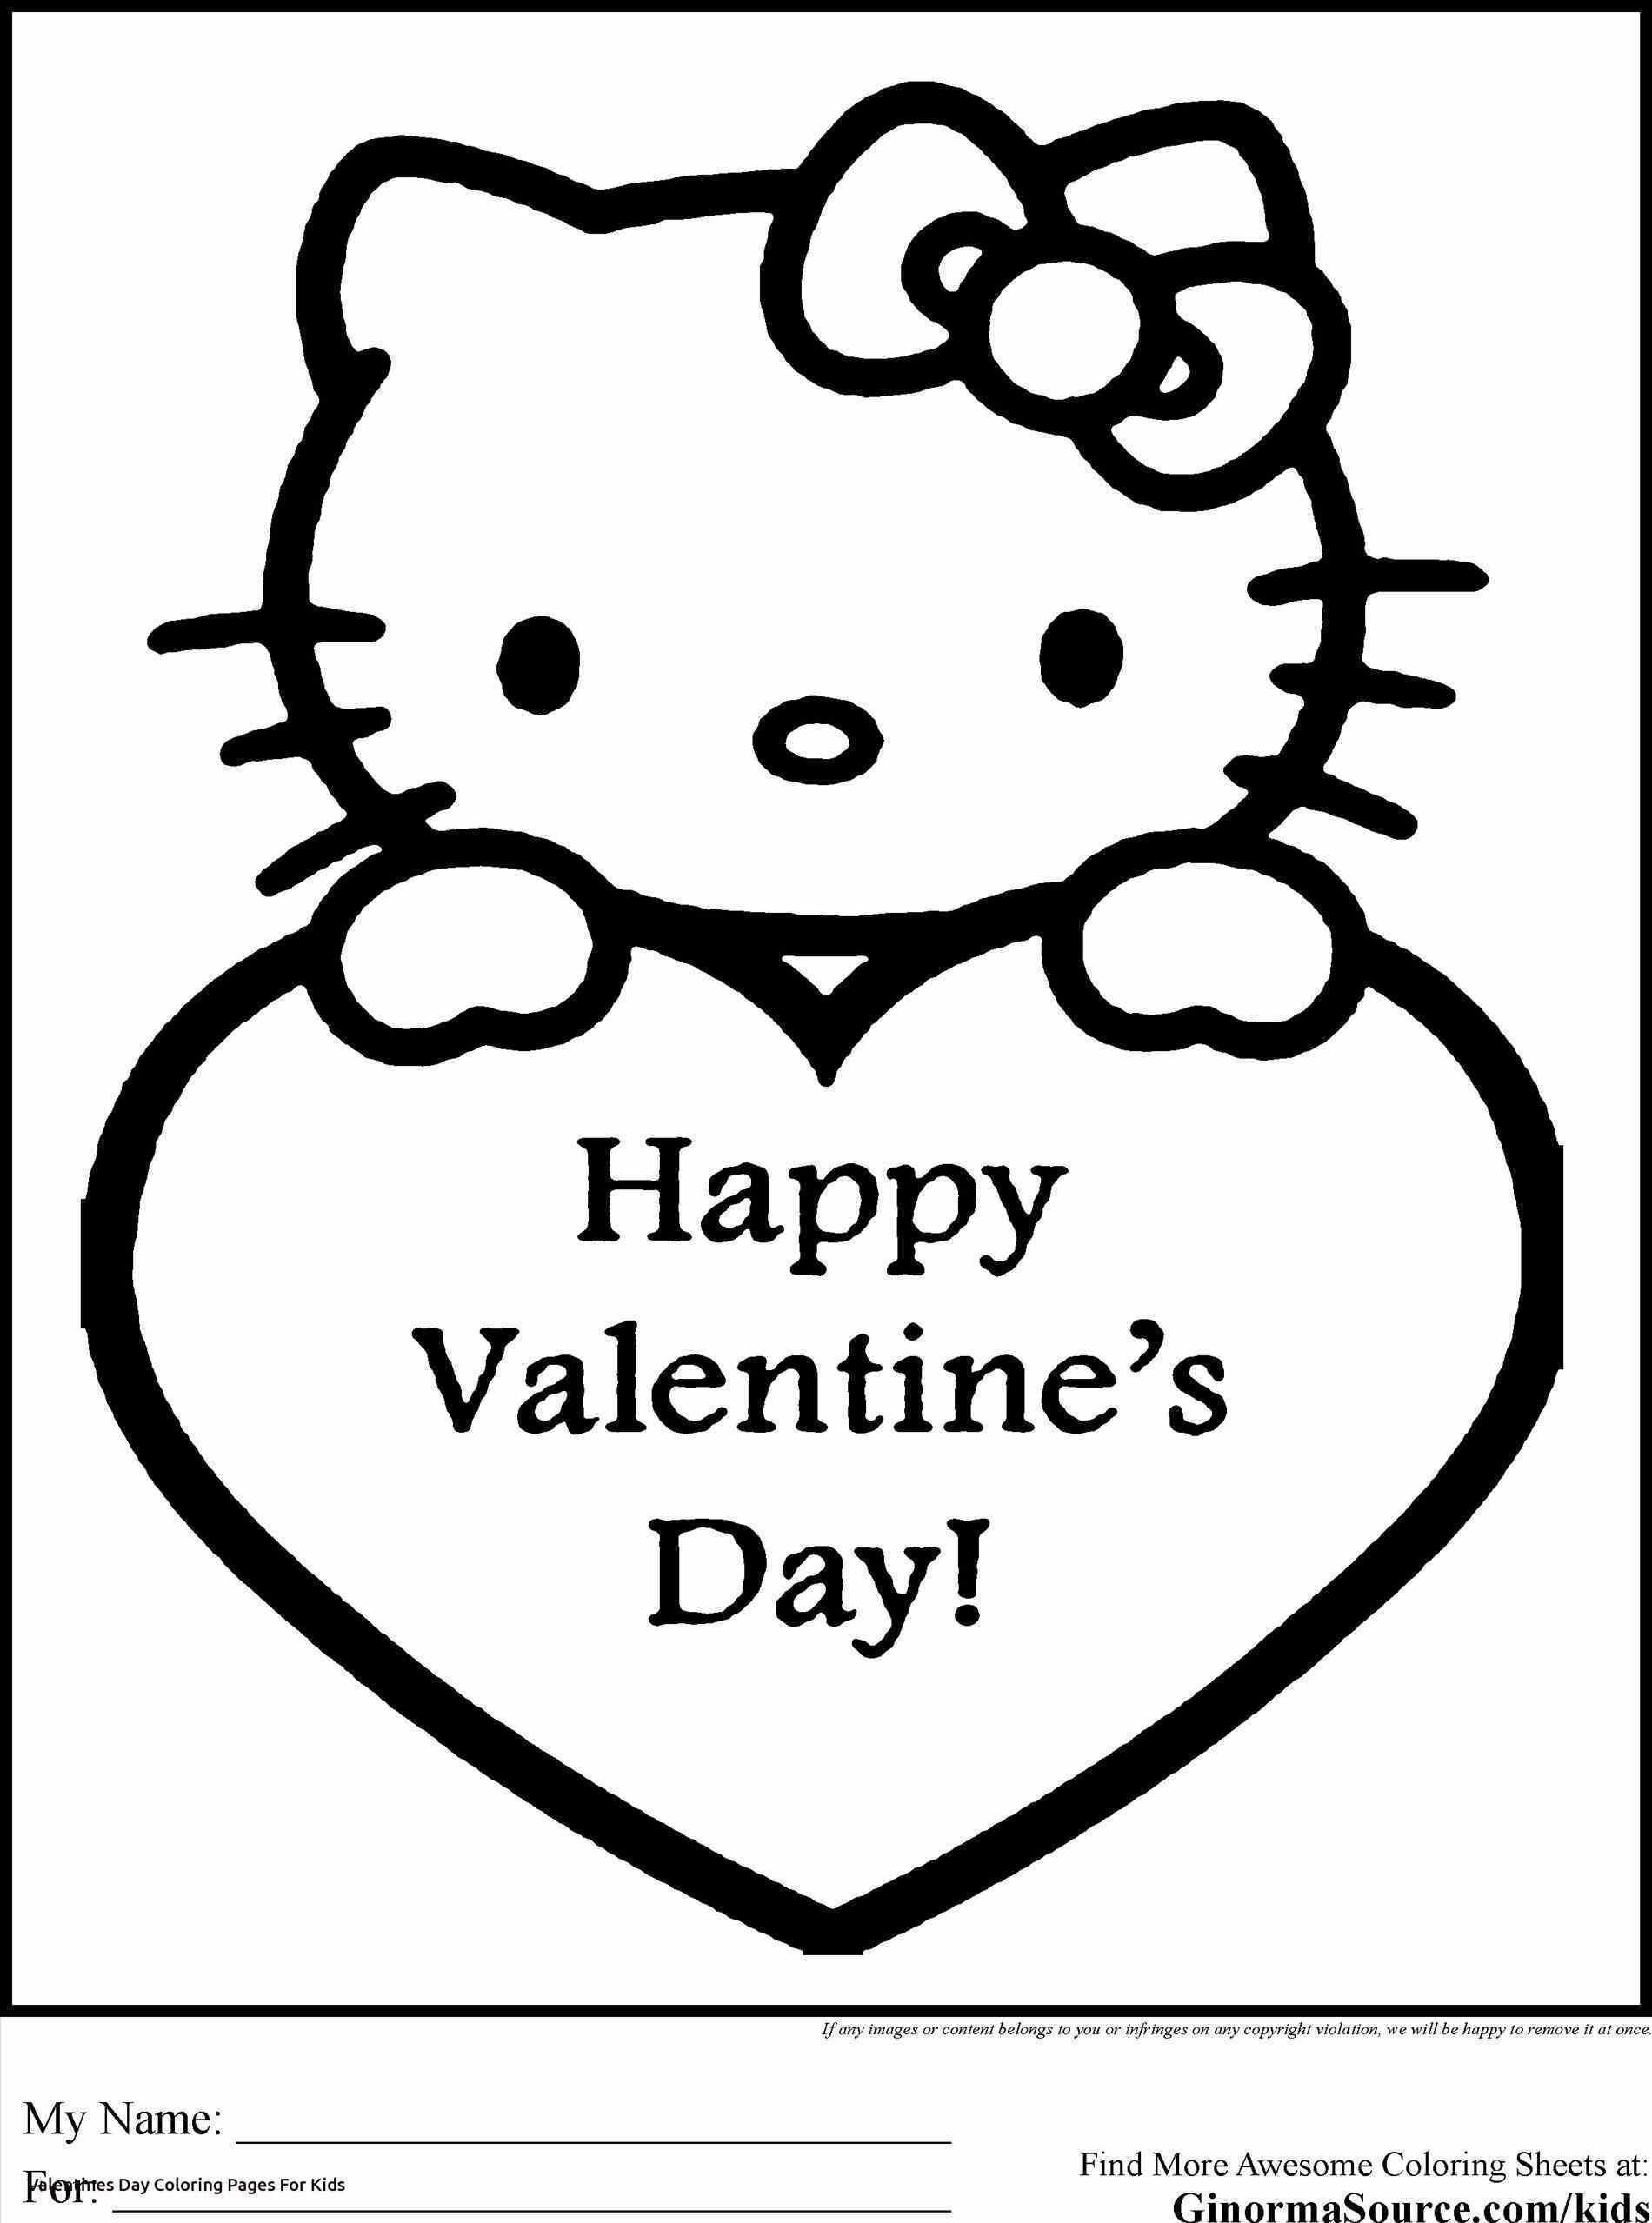 Snoopy Valentines Day Pictures Photos Images and Pics for Facebook  Tumblr Pinterest and Twitter